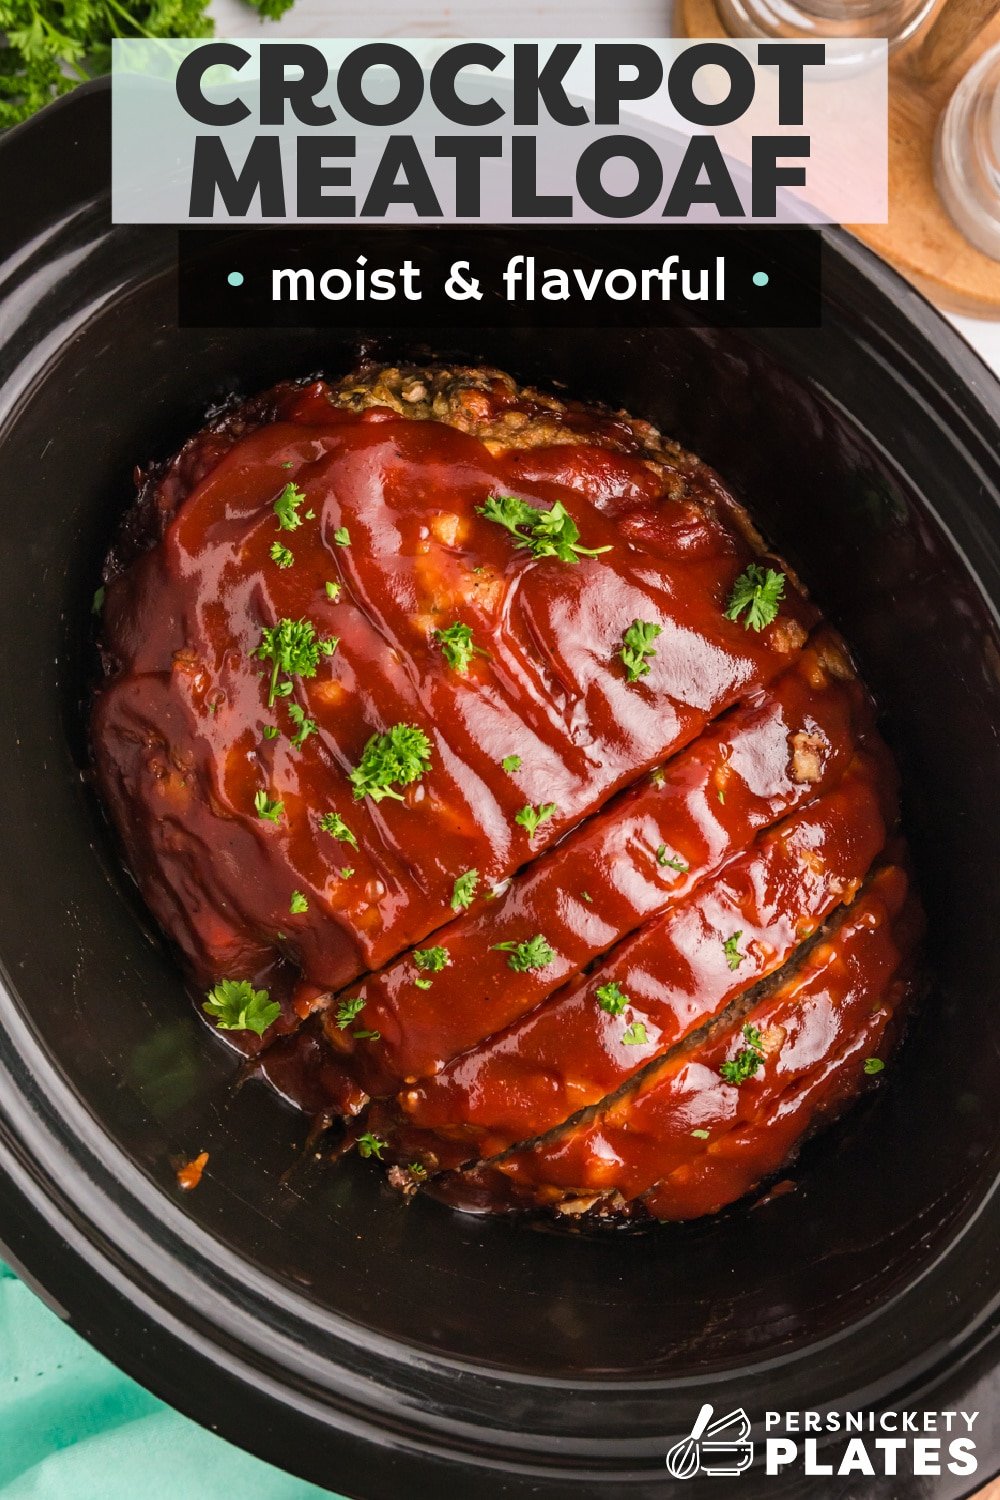 Slow-cooked deliciously seasoned meatloaf smothered in a sweet and tangy barbecue sauce, cooked until perfectly juicy and moist, with a caramelized outer crust, and then finished with even more glaze. This slow cooker meatloaf is an easy way to make a true comfort meal that'll be ready to serve with all your favorite sides any night of the week. | www.persnicketyplates.com